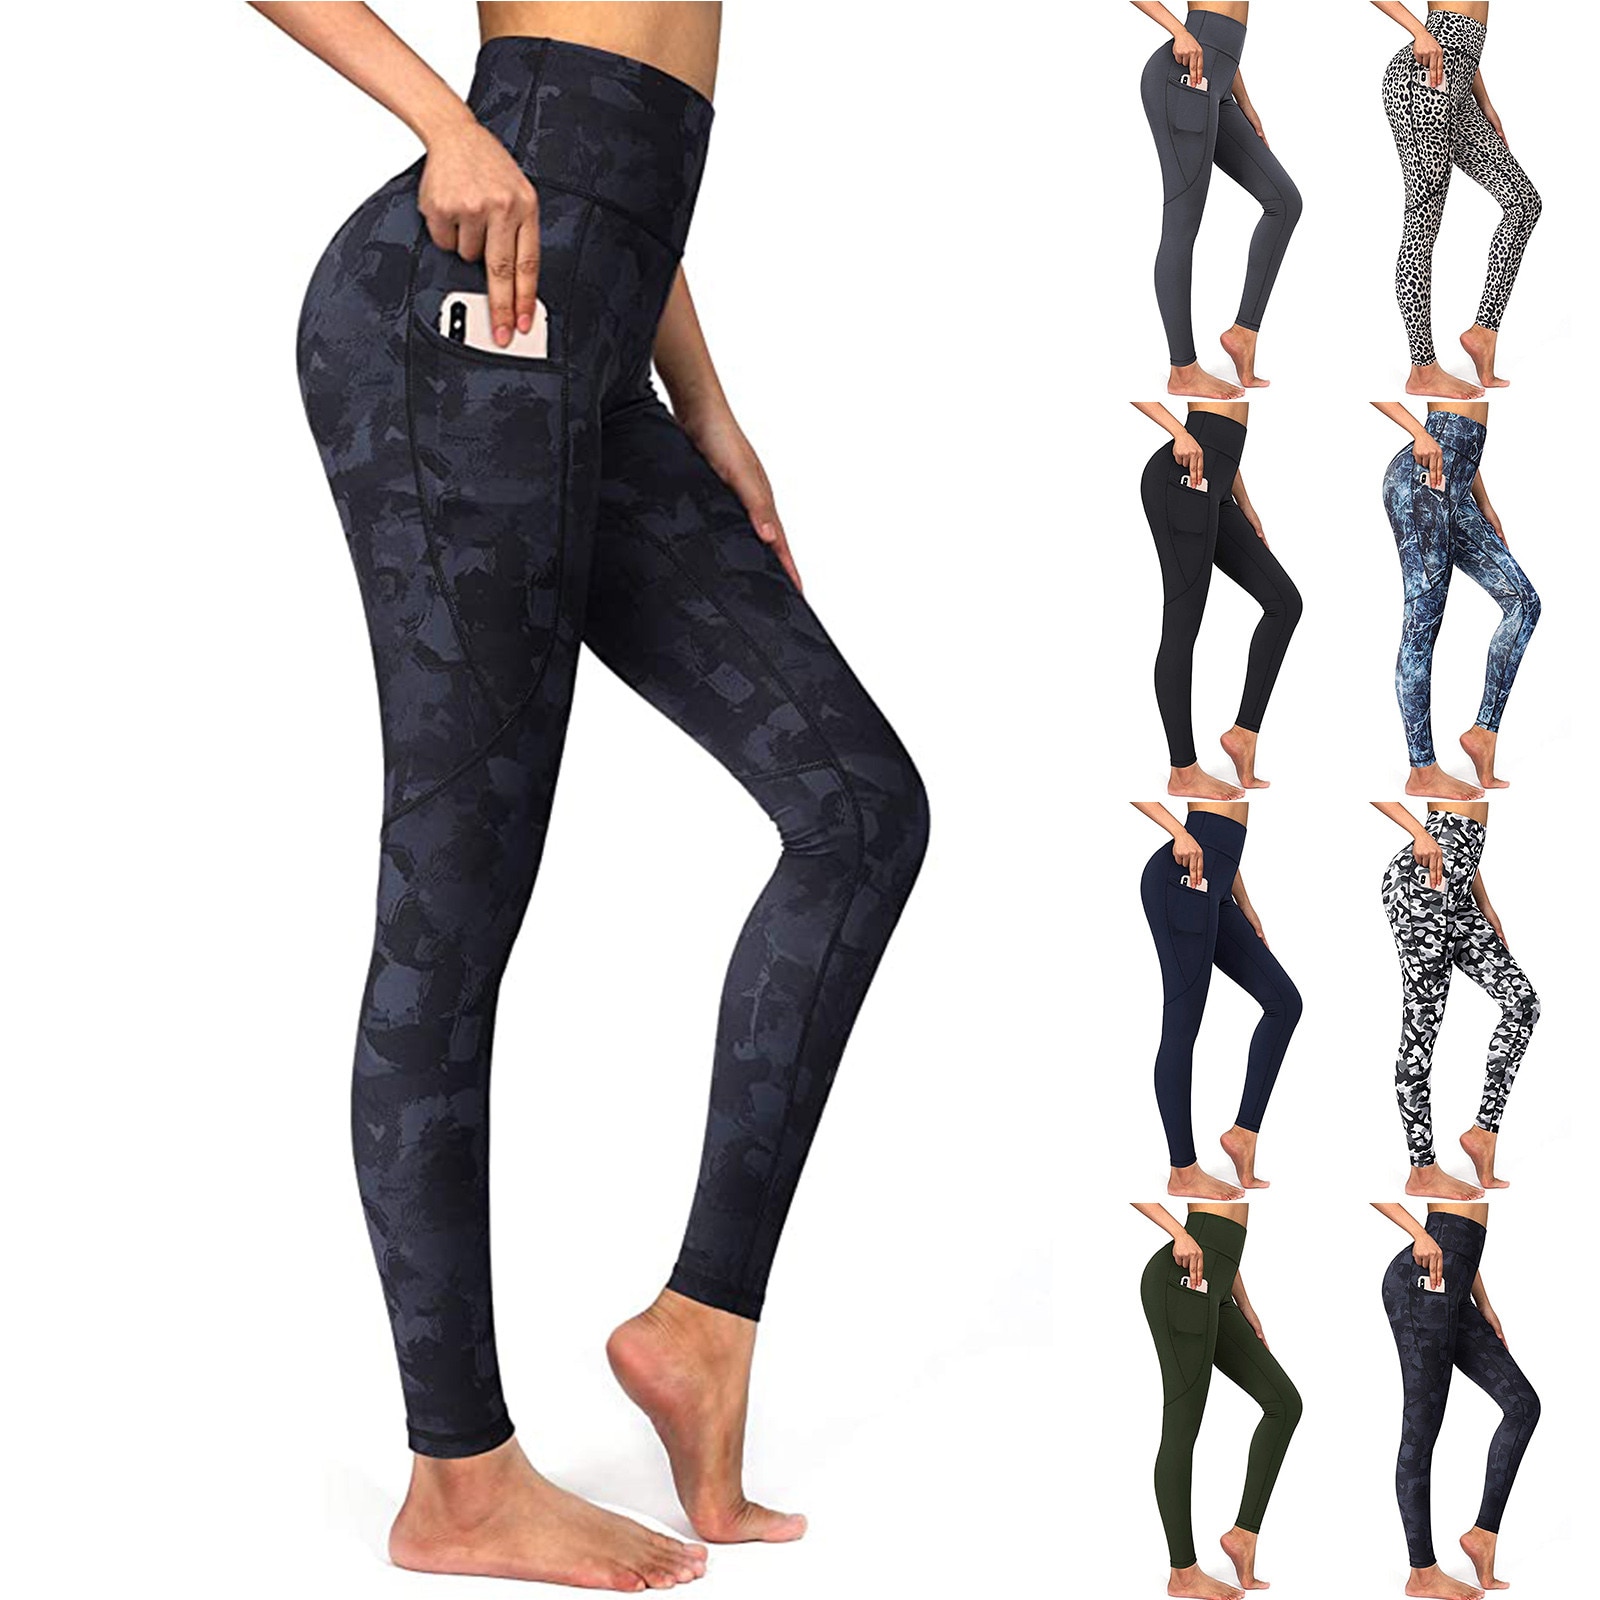 Yoga leggings Seamless High Waist Women With Pockets Workout Breathable Fitness Clothing Training Pants Female trousers legins